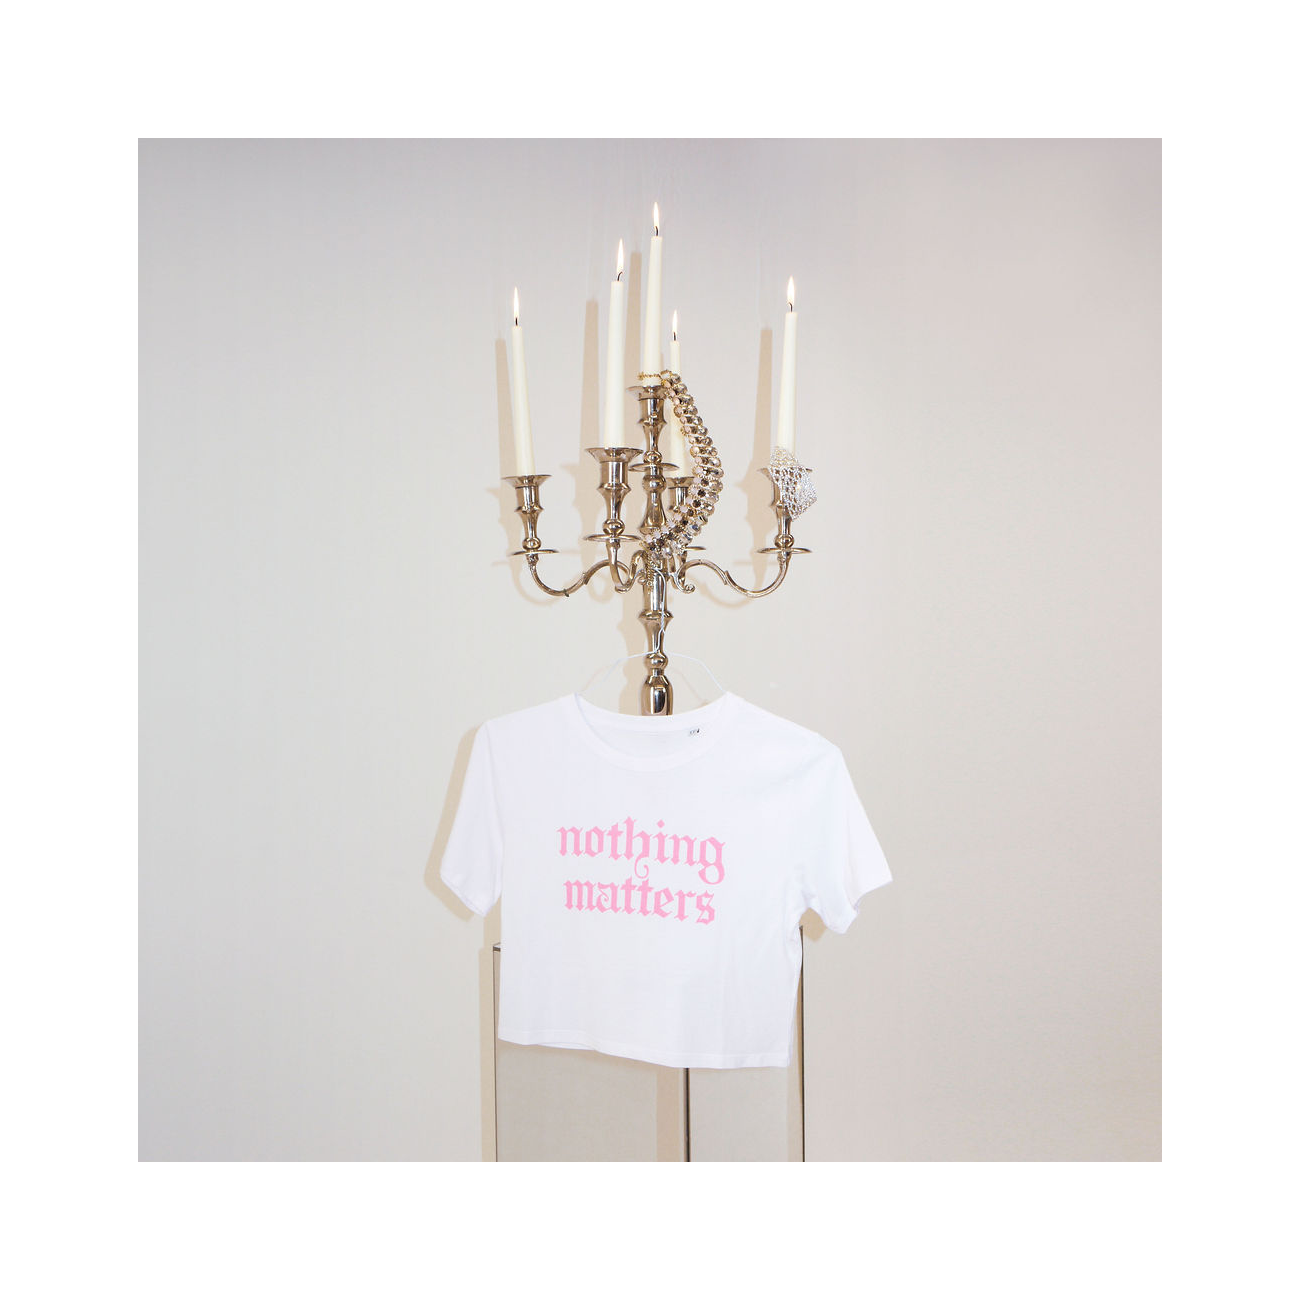 The Last Dinner Party - Nothing Matters: Baby Tee